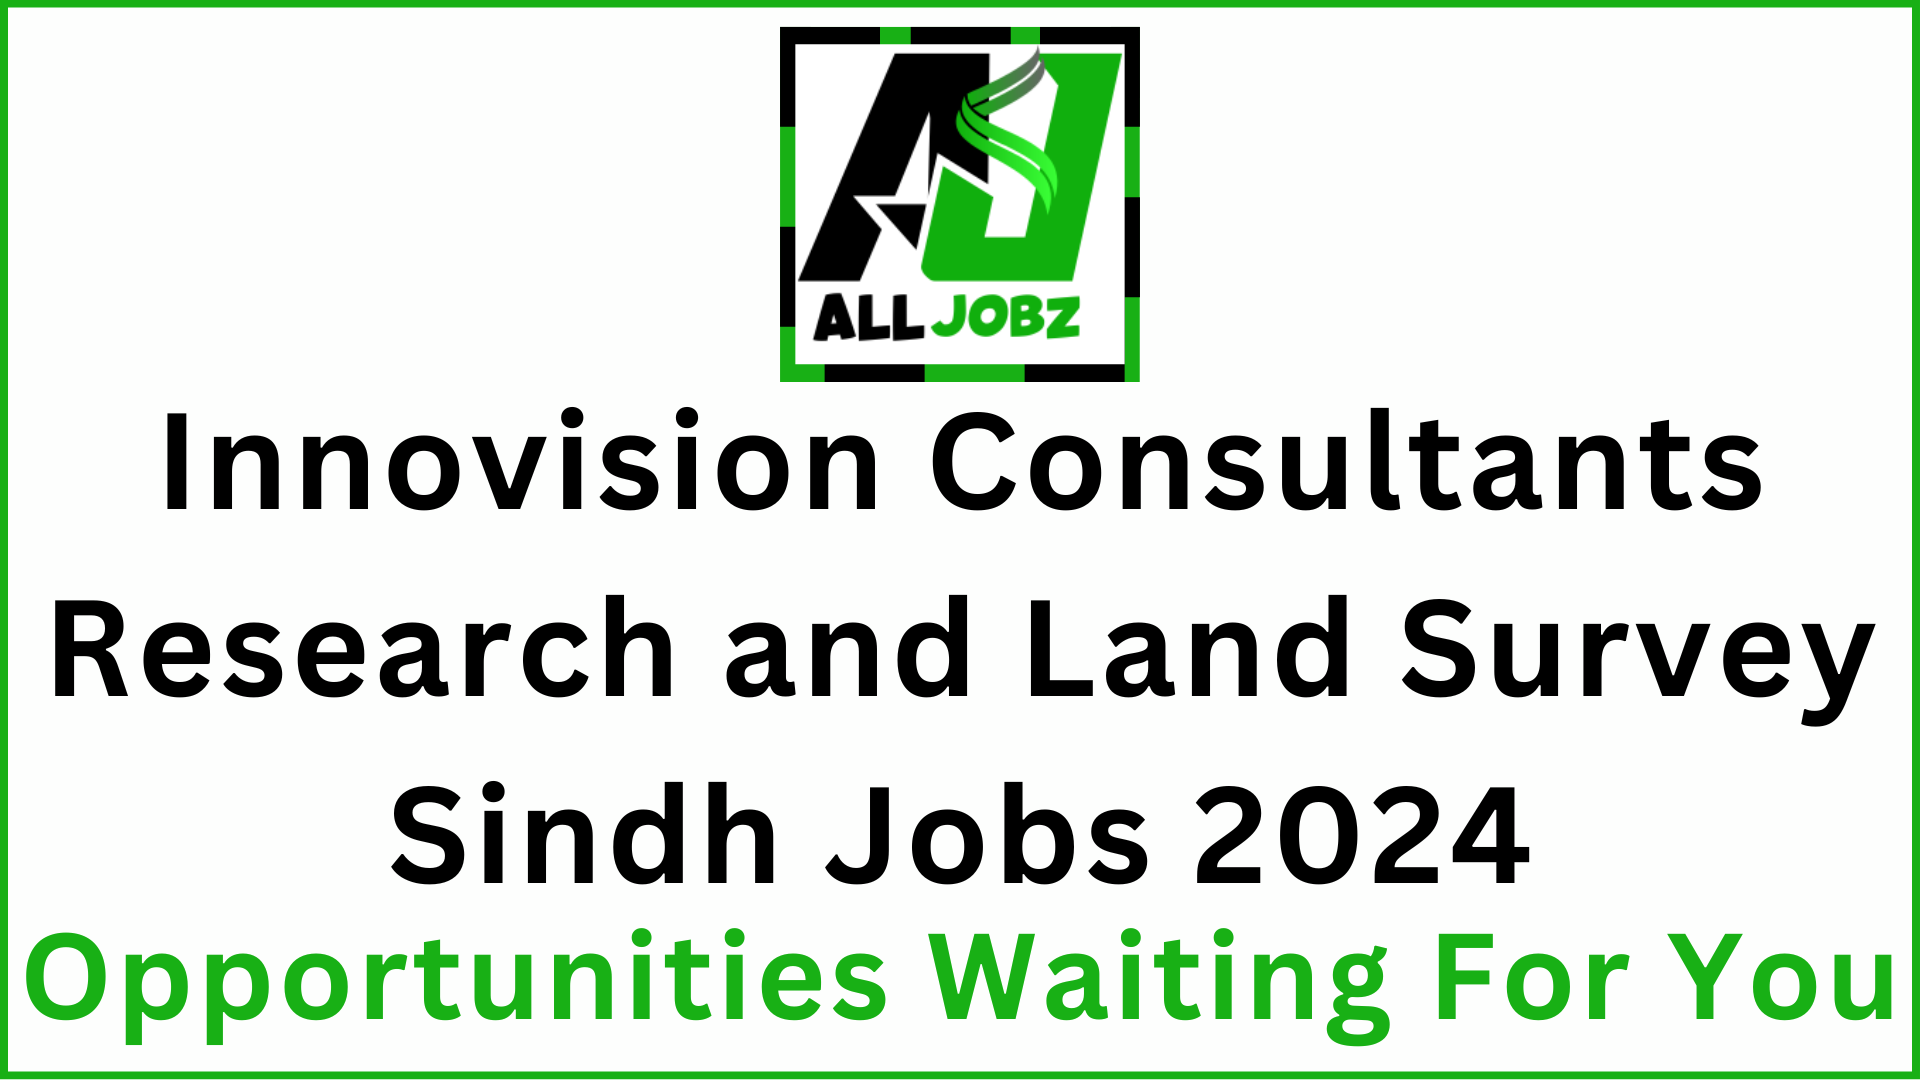 Innovision Consultants Research And Land Survey Jobs